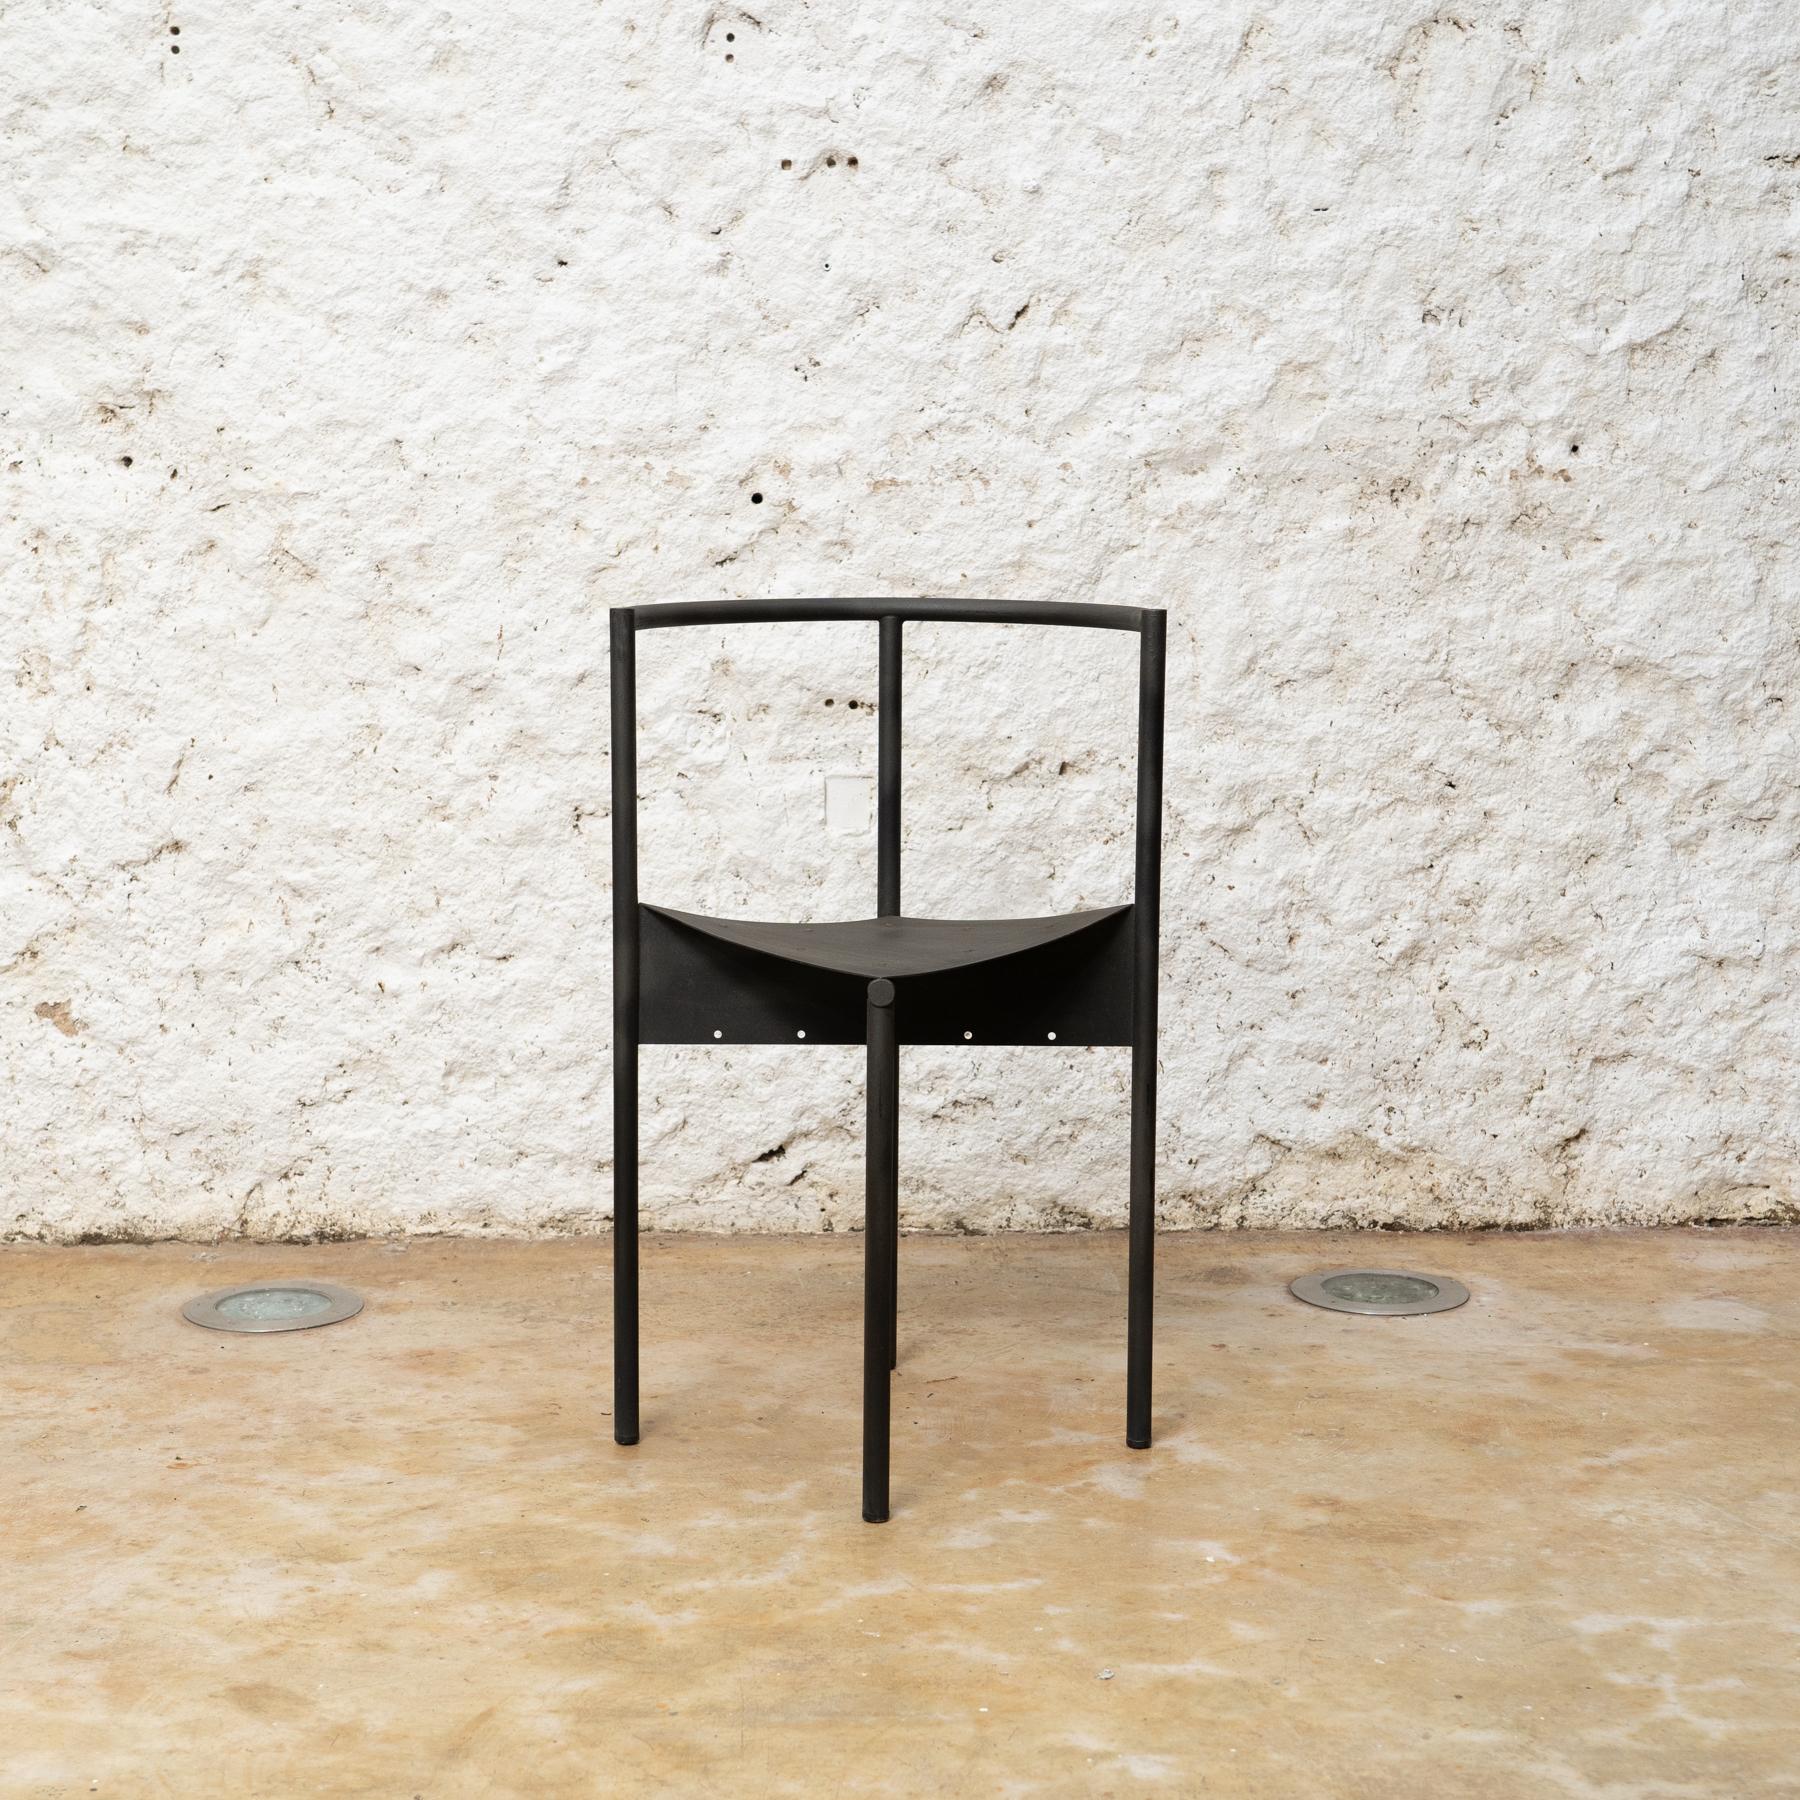 Mid-Century Modern Chair Wendy Wright by Phillipe Starck for Disform, circa 1983 For Sale